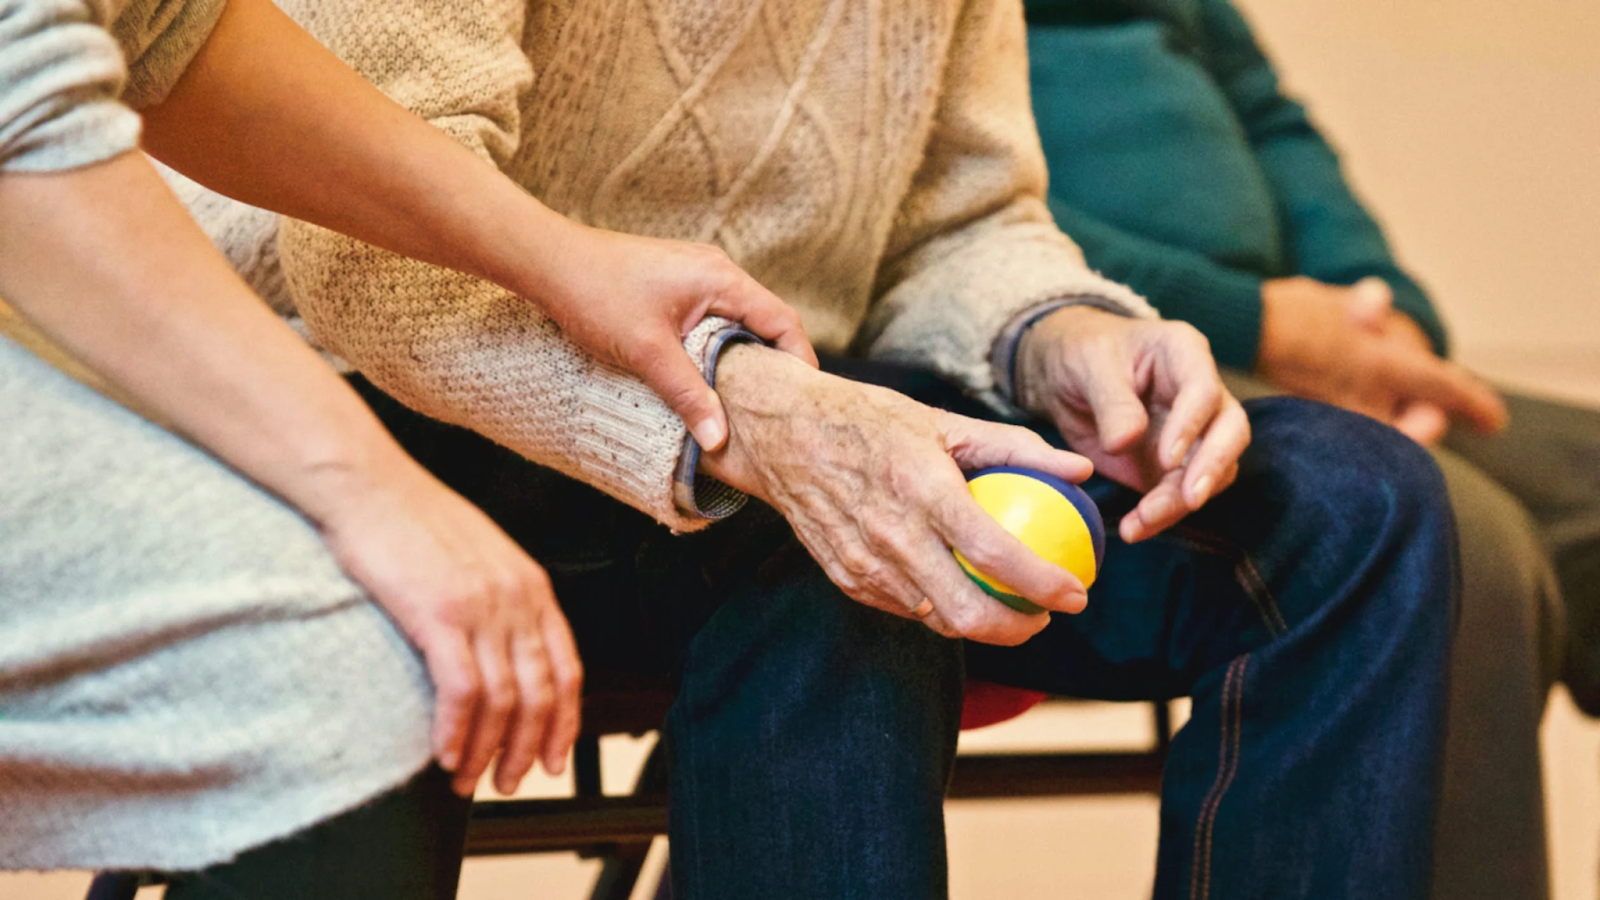 A senior patient squeezing a stress ball